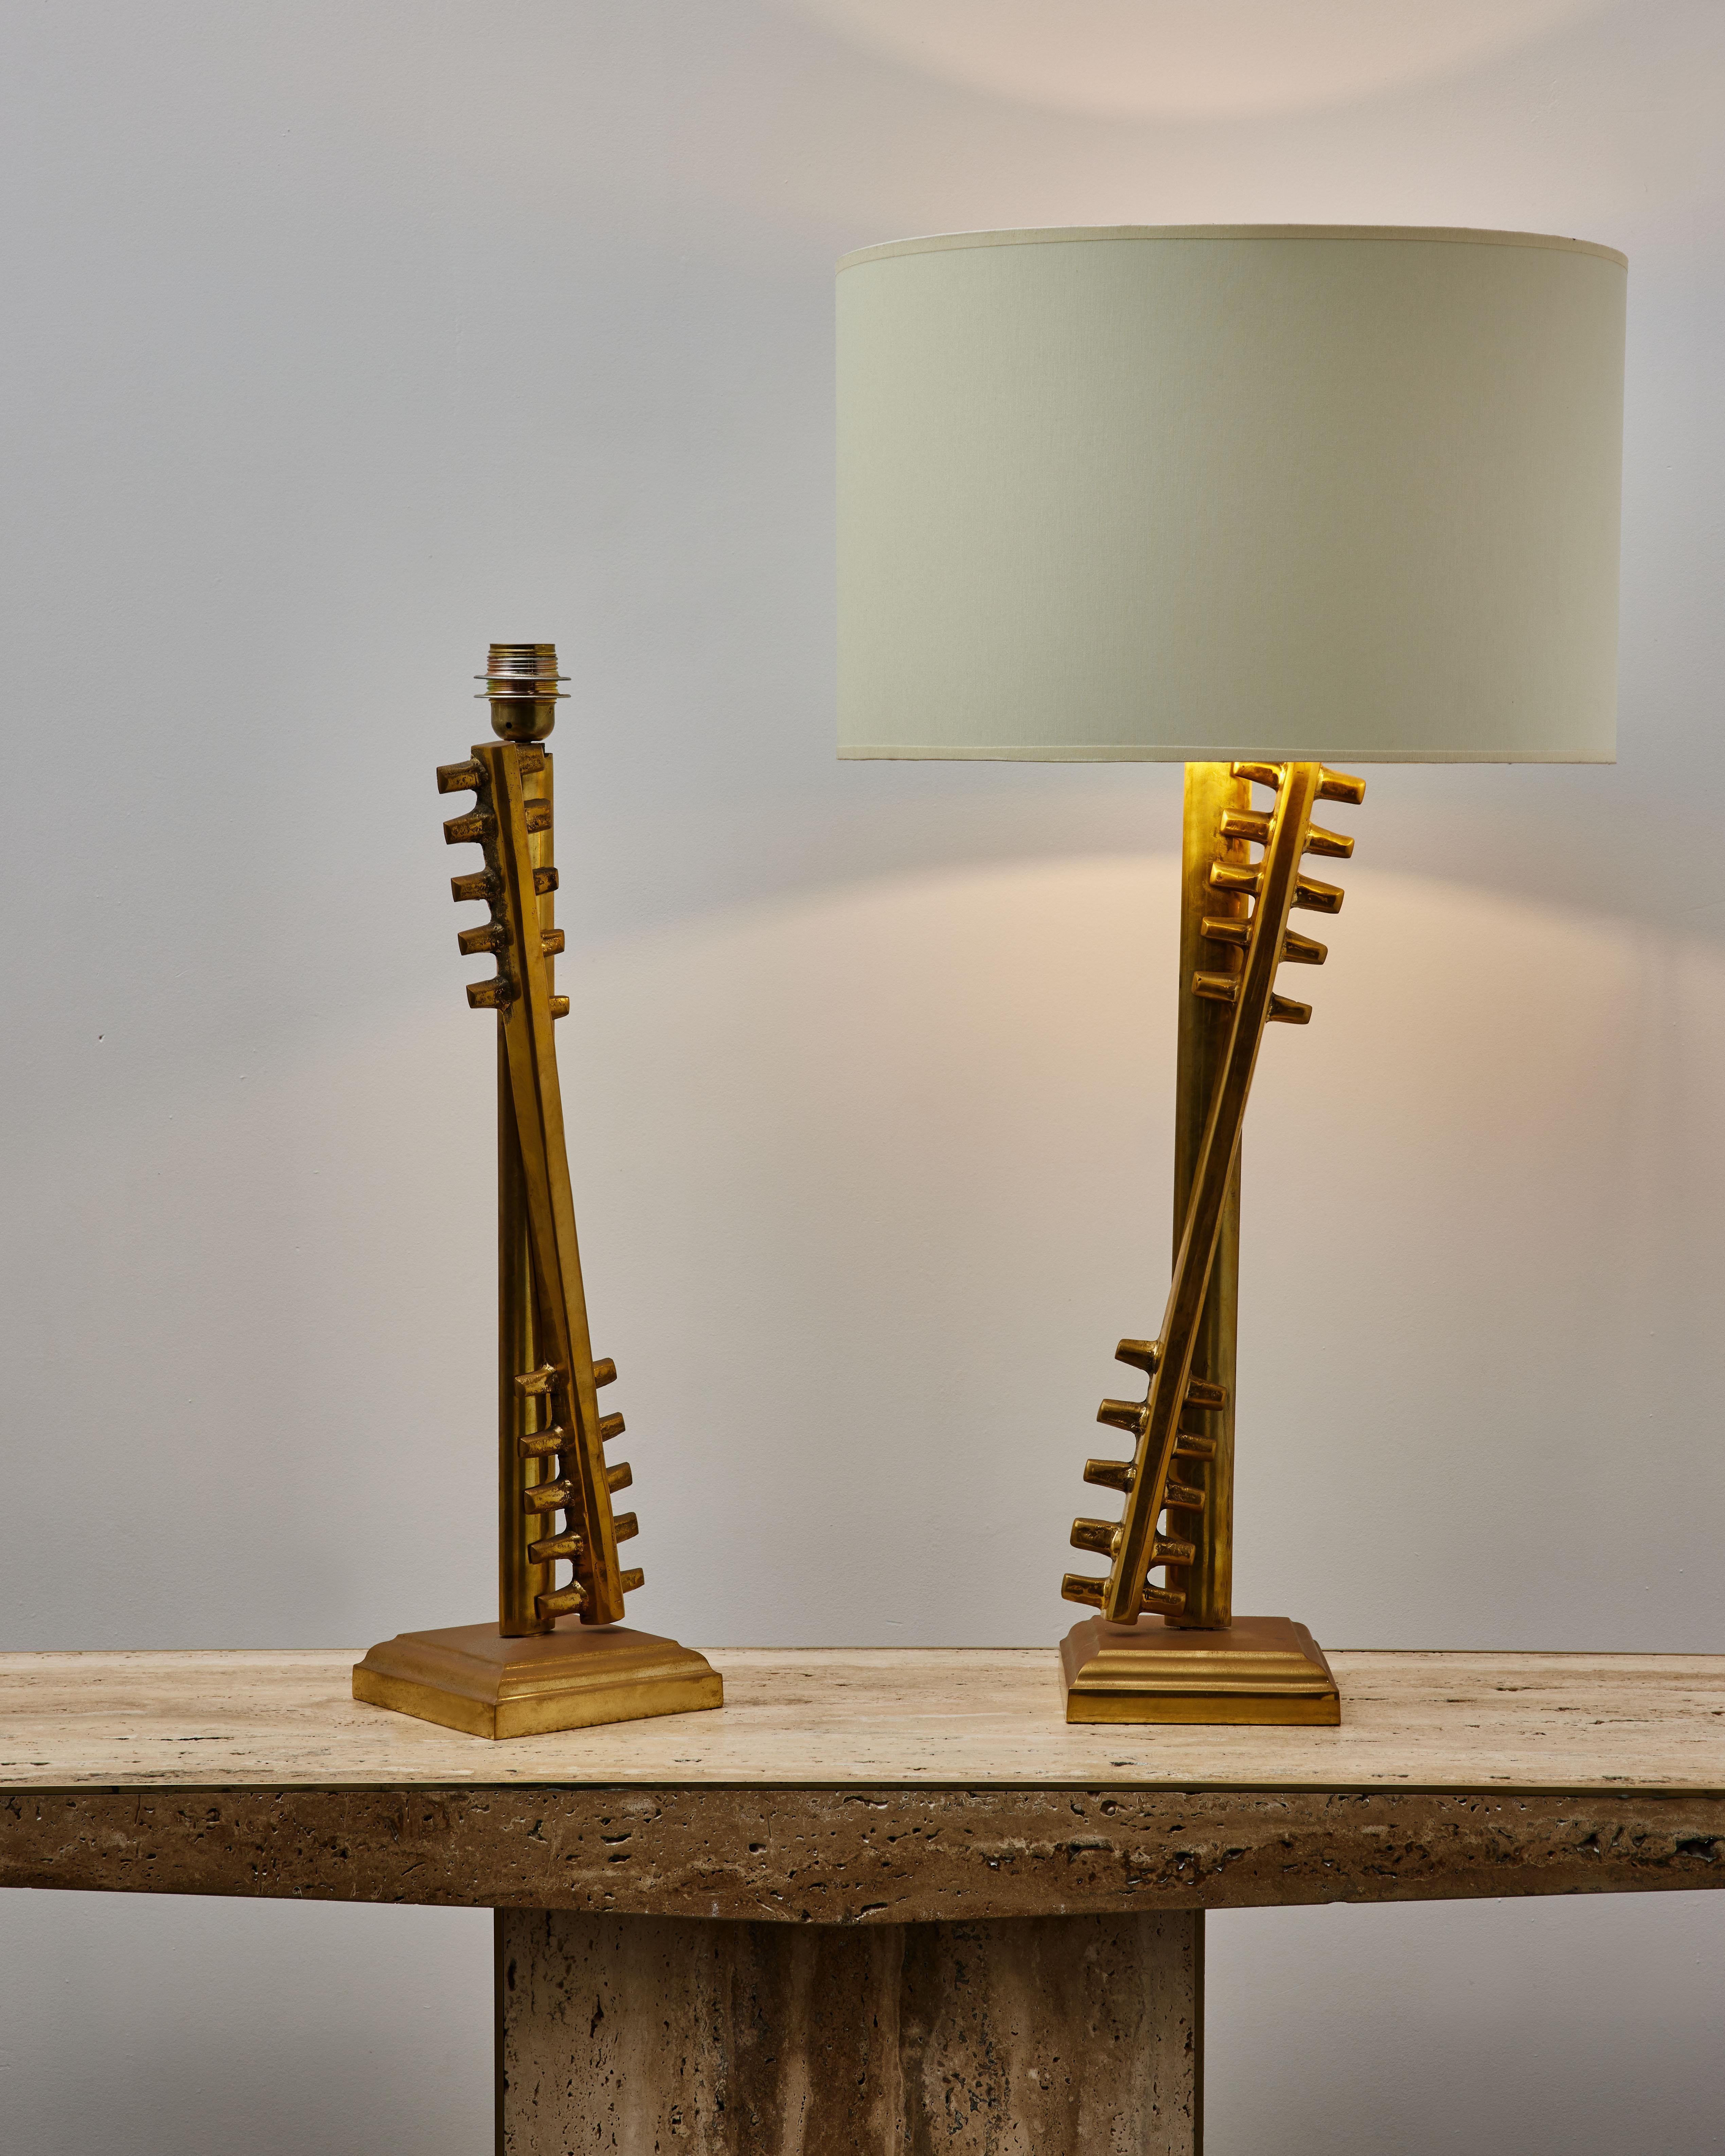 Superb pair of vintage table lamps in sculpted brass.
Rewired.
France, 1980s

Price and dimensions without shades.